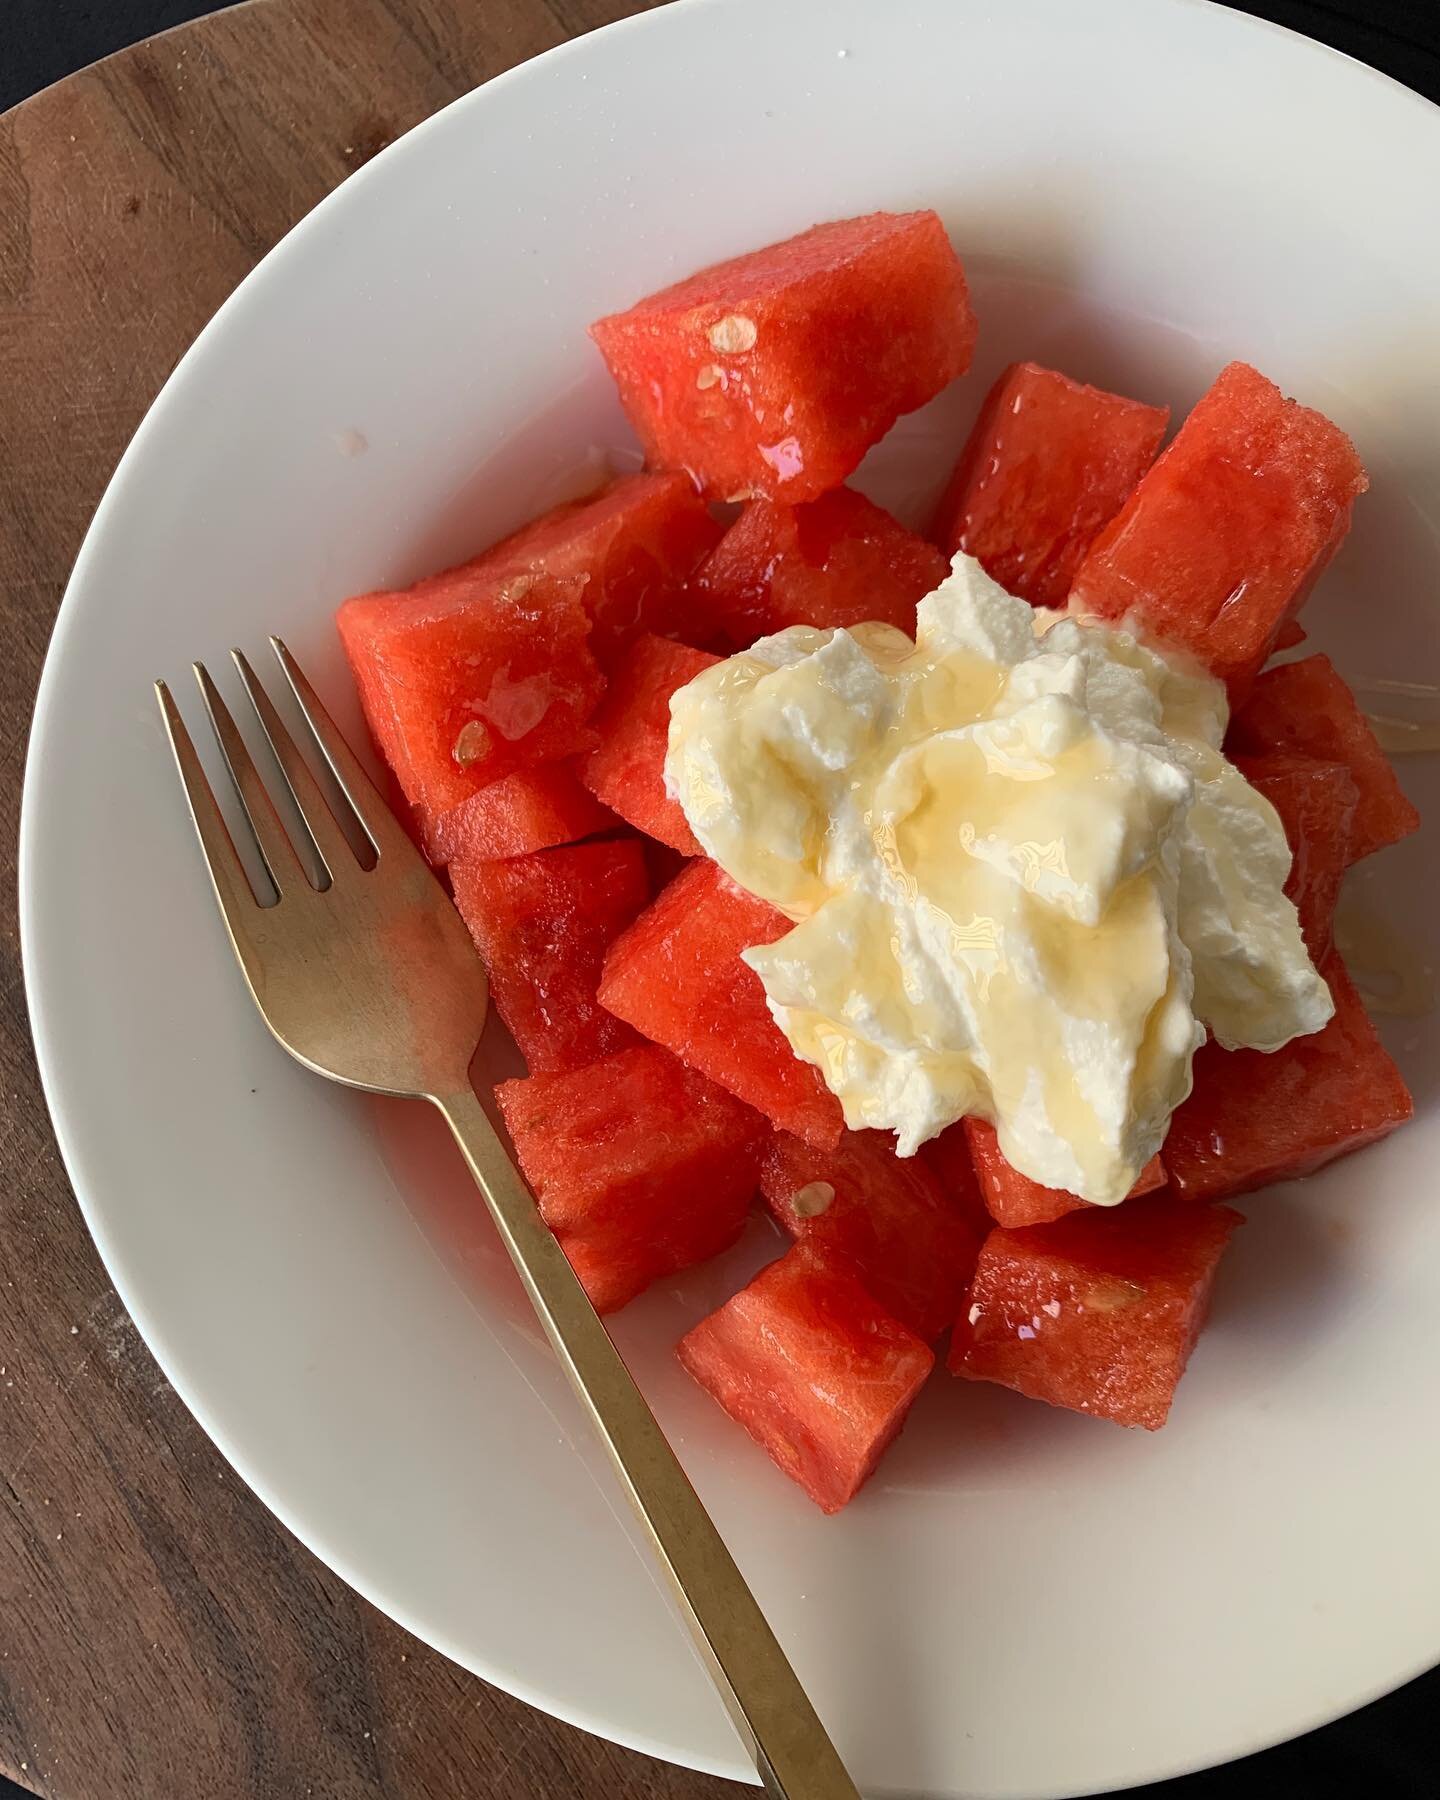 Looking like an easy summer snack! Watermelon, honey and a healthy dollop of whole milk ricotta. Wish I had some mint but maybe next time. 🍉🍯😋 #watermelonsugarhigh